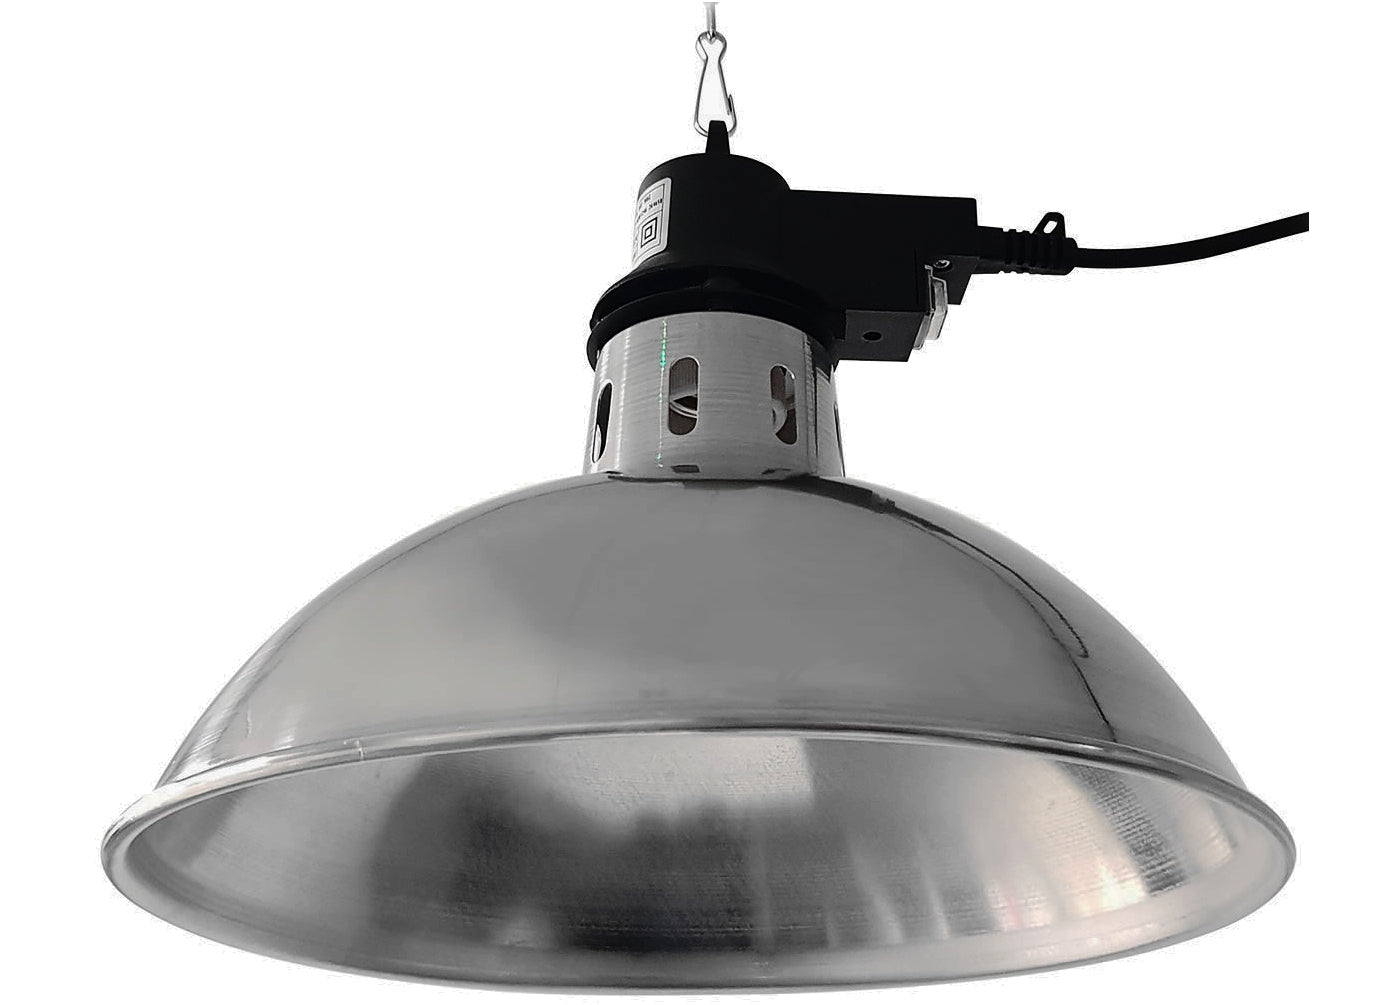 Intelec - Traditional Infra-Red Heat Lamp with Reducer Switch - Buy Online SPR Centre UK